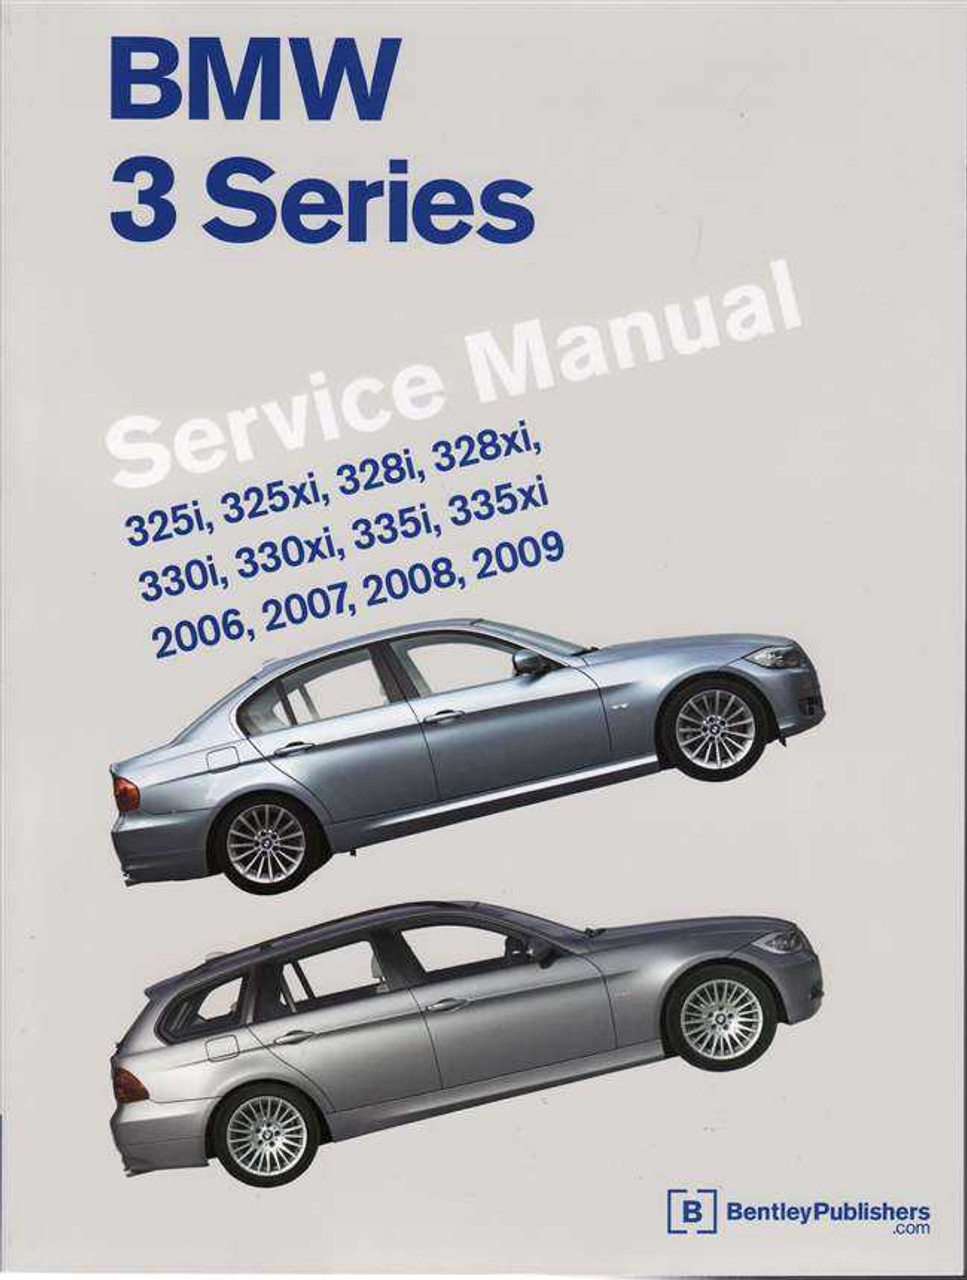 How to update and download bmw 328i software